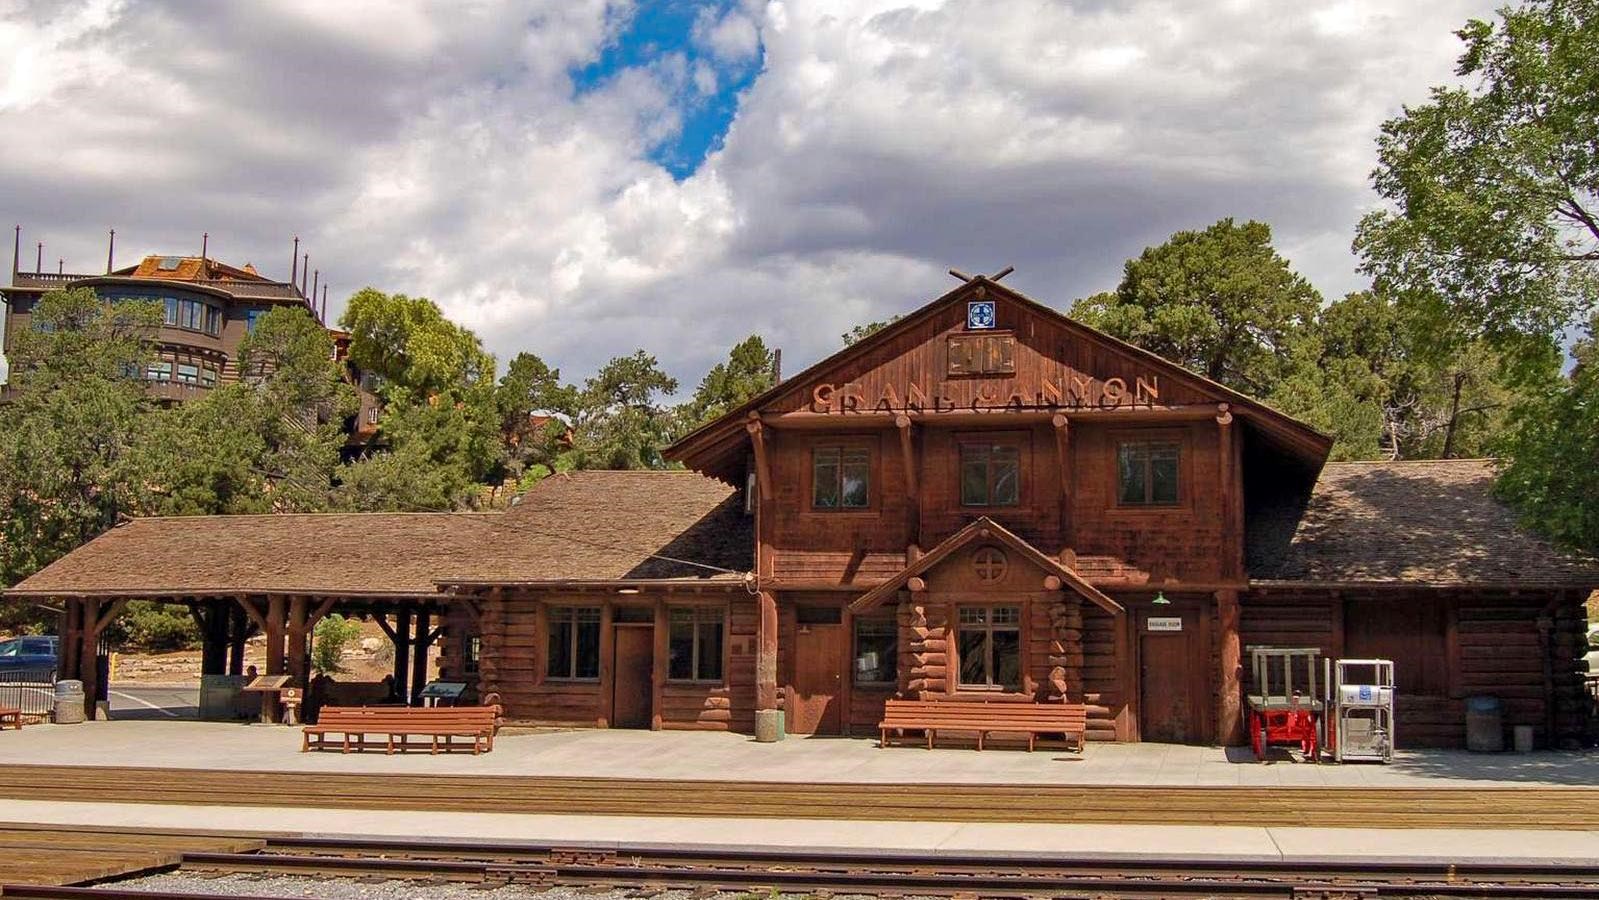 Along railroad tracks, a log building, mostly one story, with a two story section in the center.